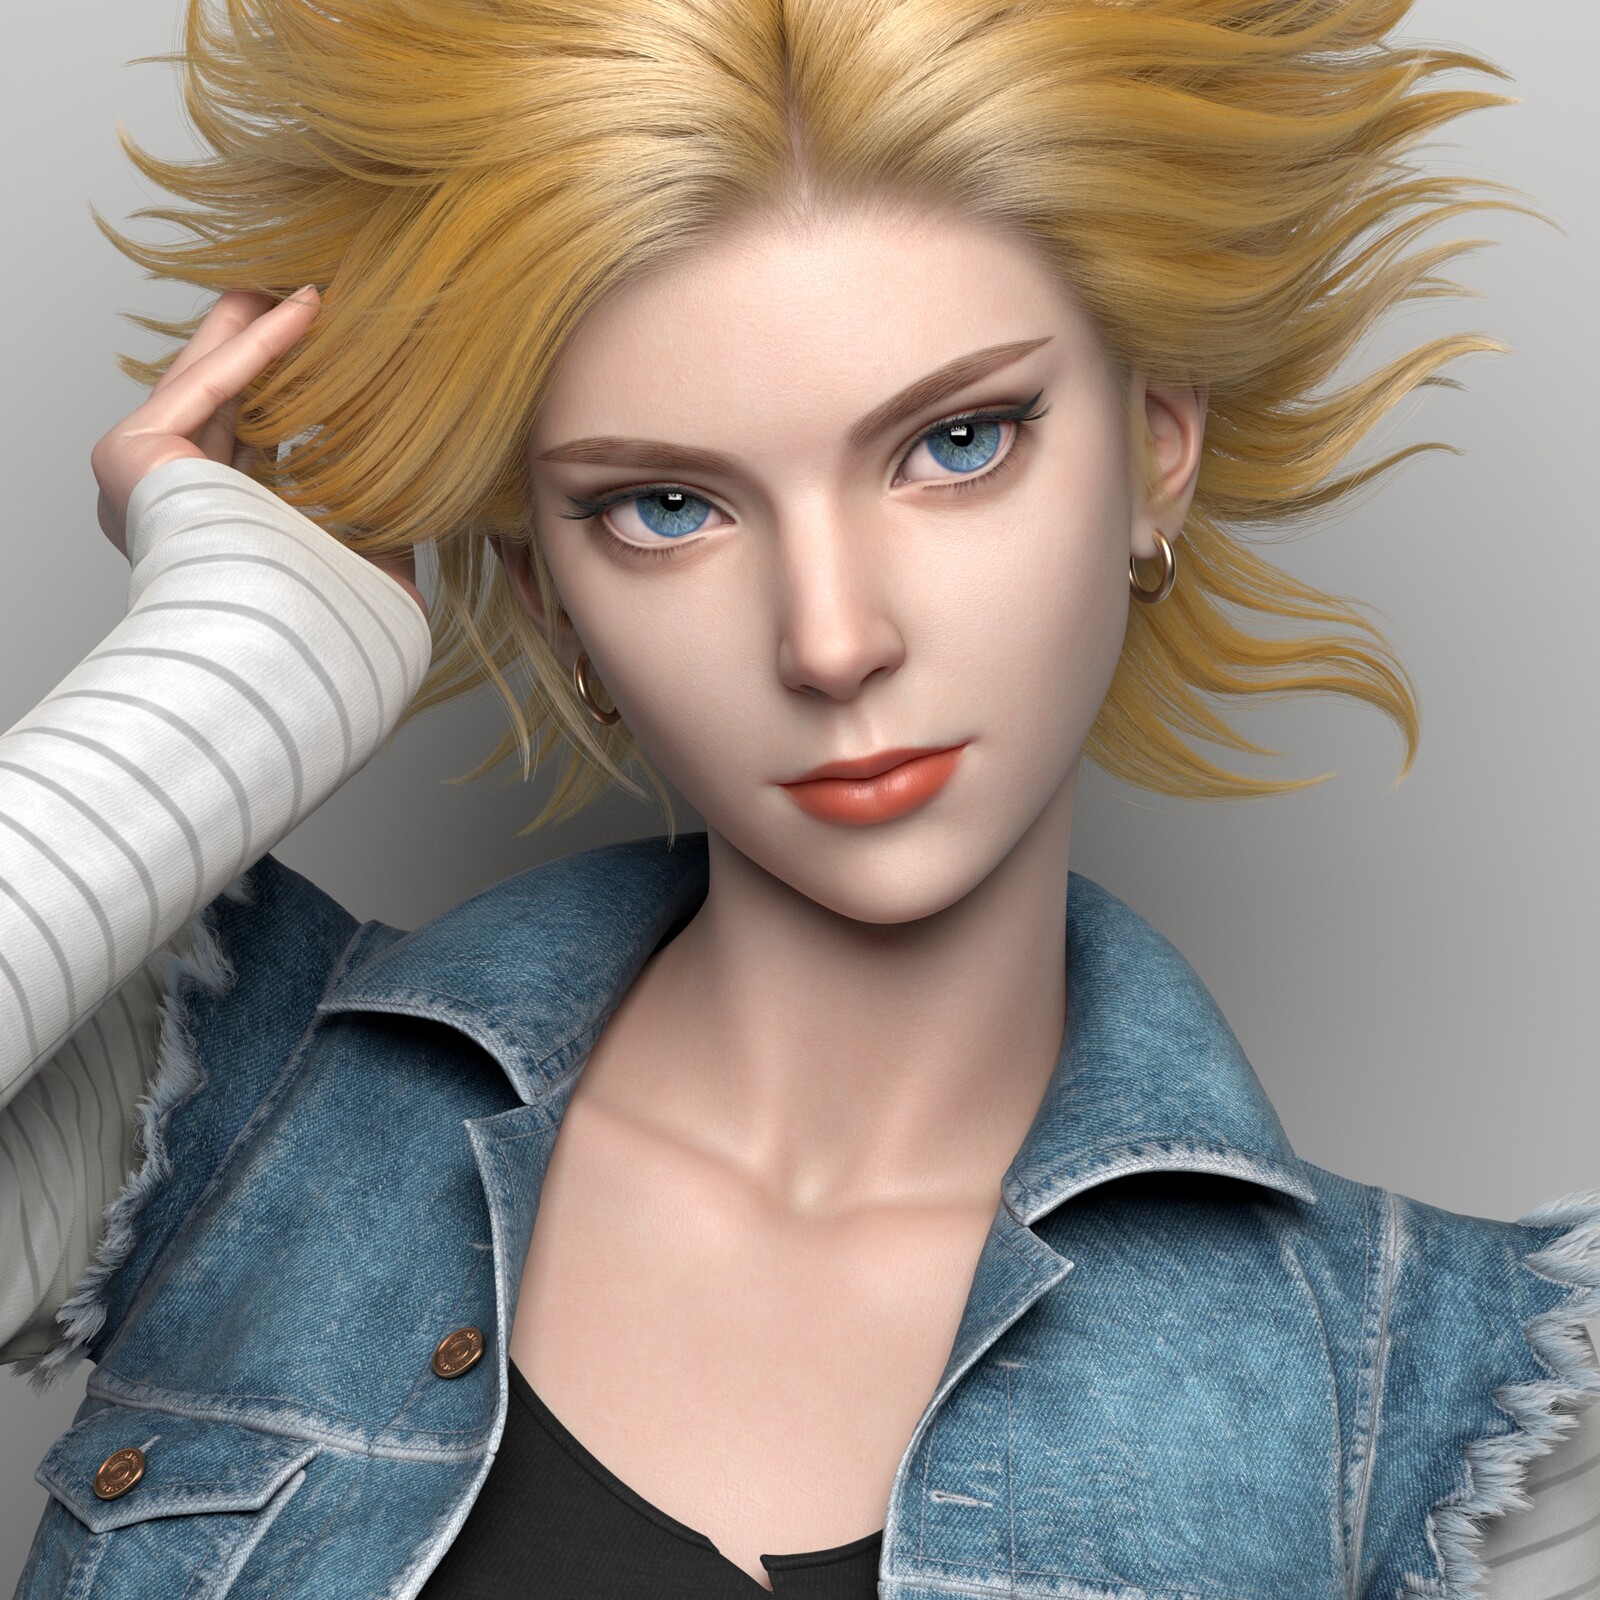  Dragon Ball Z No. 18 android cosplay fanart 3d